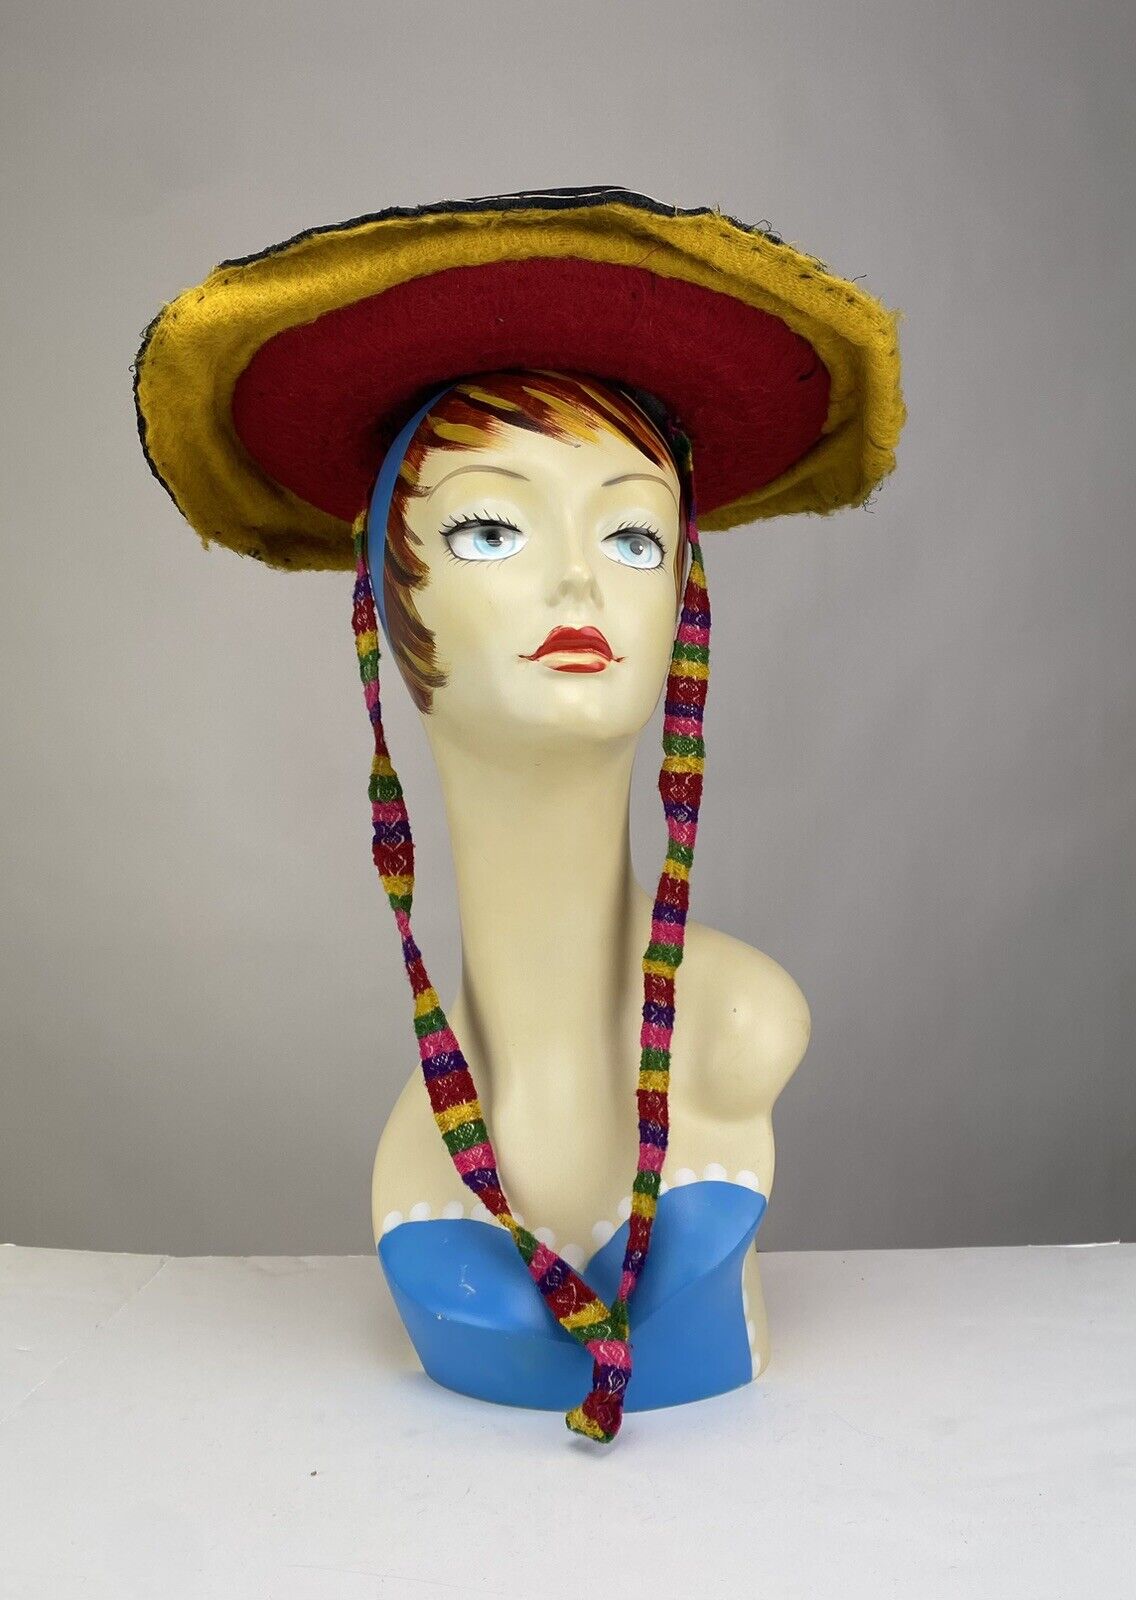 Antique Peruvian Quechuan Montera Andes handmade hat with bright colors, as is